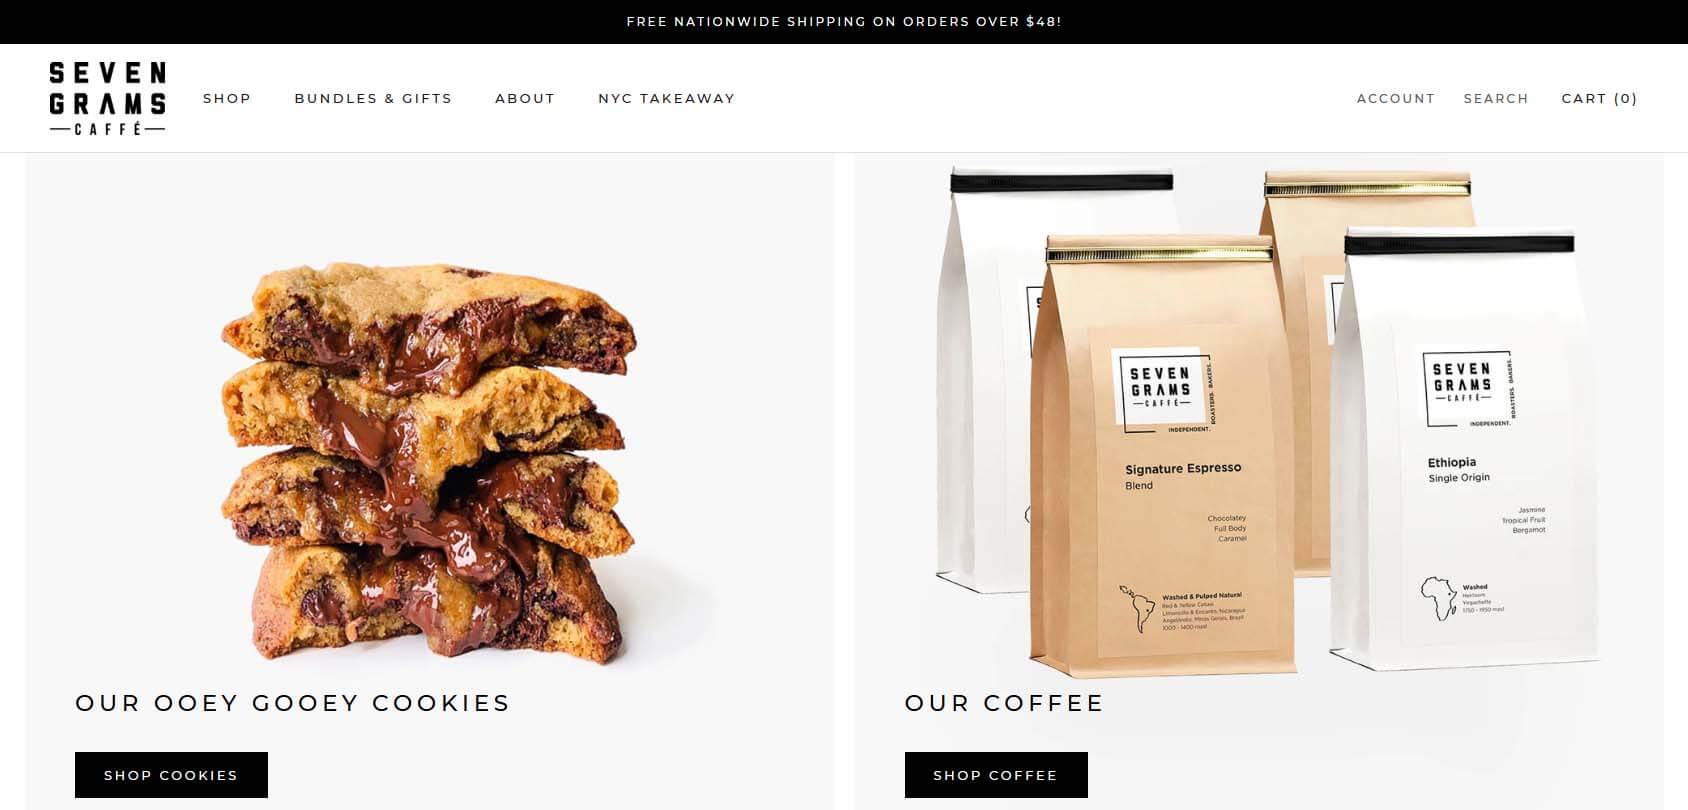 Seven Grams Caffe Homepage